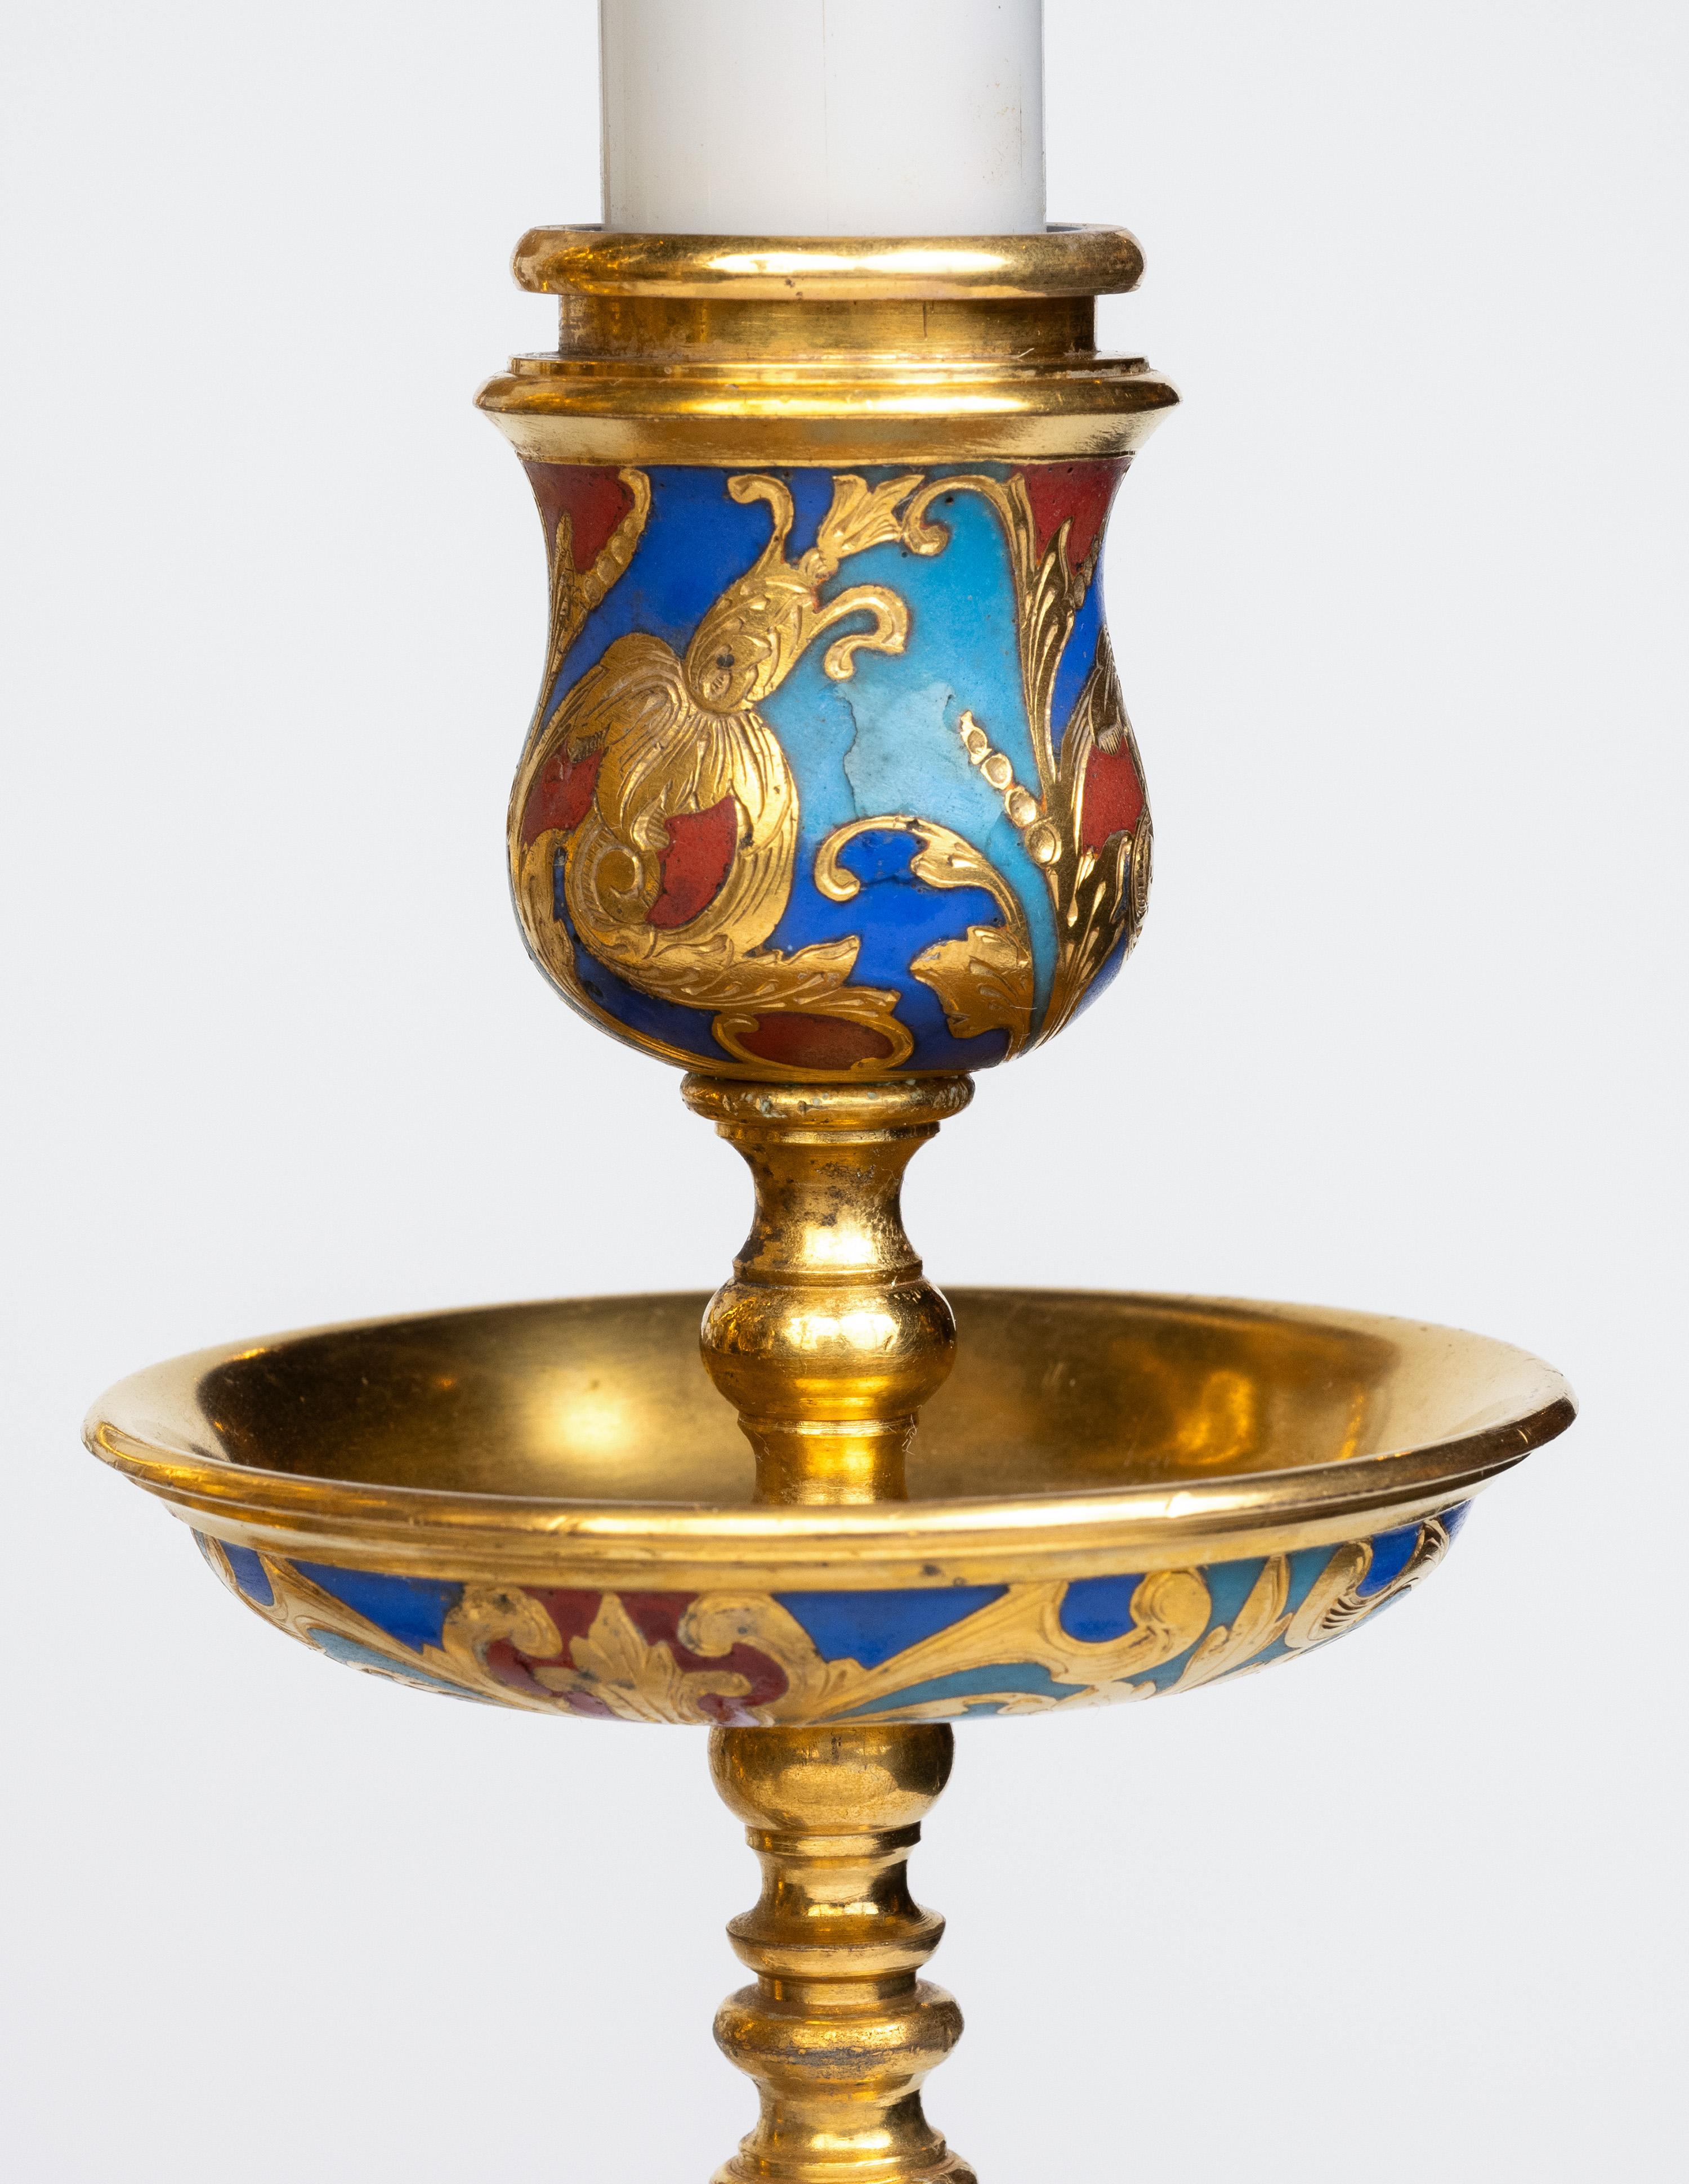 An Exceptional Pair of Champleve Enamel Ormolu Candelabra by Sevin & Barbedienne For Sale 2